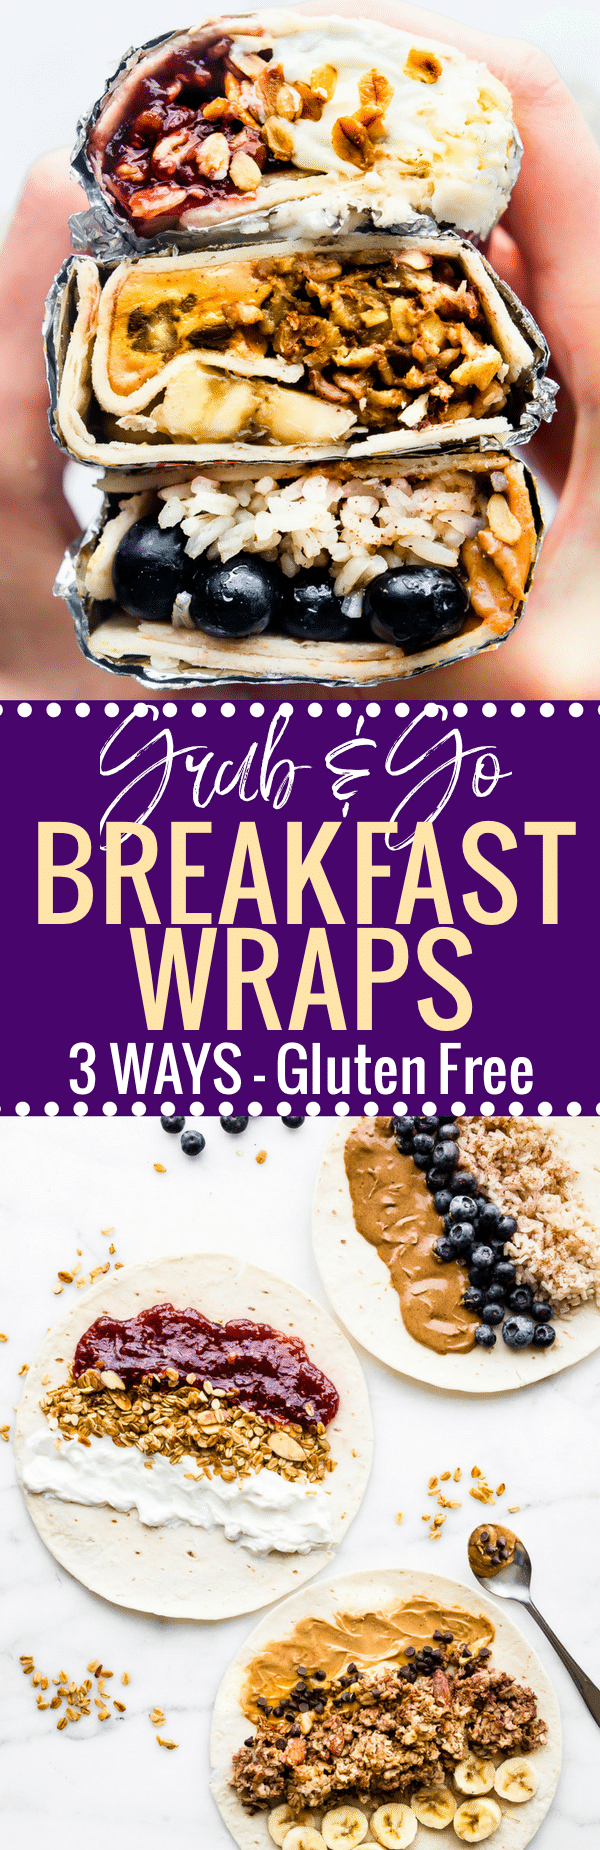 These sweet Gluten Free breakfast wraps are the perfect grab and go breakfast! Portable, freezer friendly, and filled with wholesome simple ingredients! Literally a healthy breakfast bowl wrapped up to go, 3 ways! Healthy breakfast wraps will satisfy your hunger and busy schedule. www.cottercrunch.com #udisglutenfree